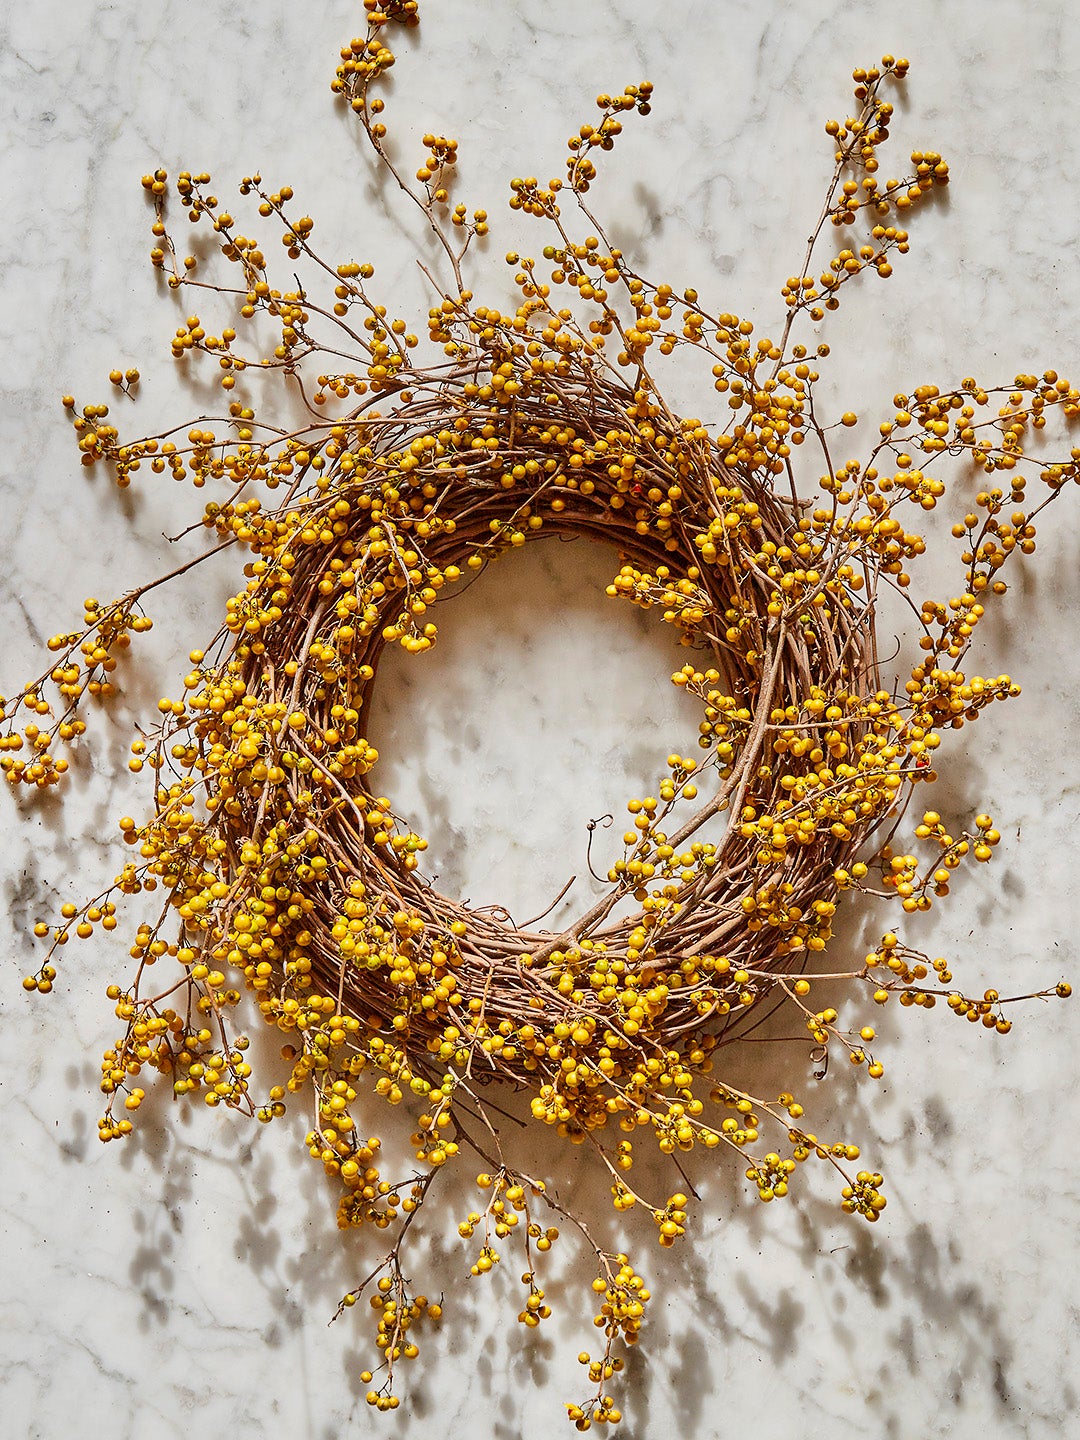 All You Need Is This $20 Amazon Find (and 5 Minutes) to Make a Fall Wreath